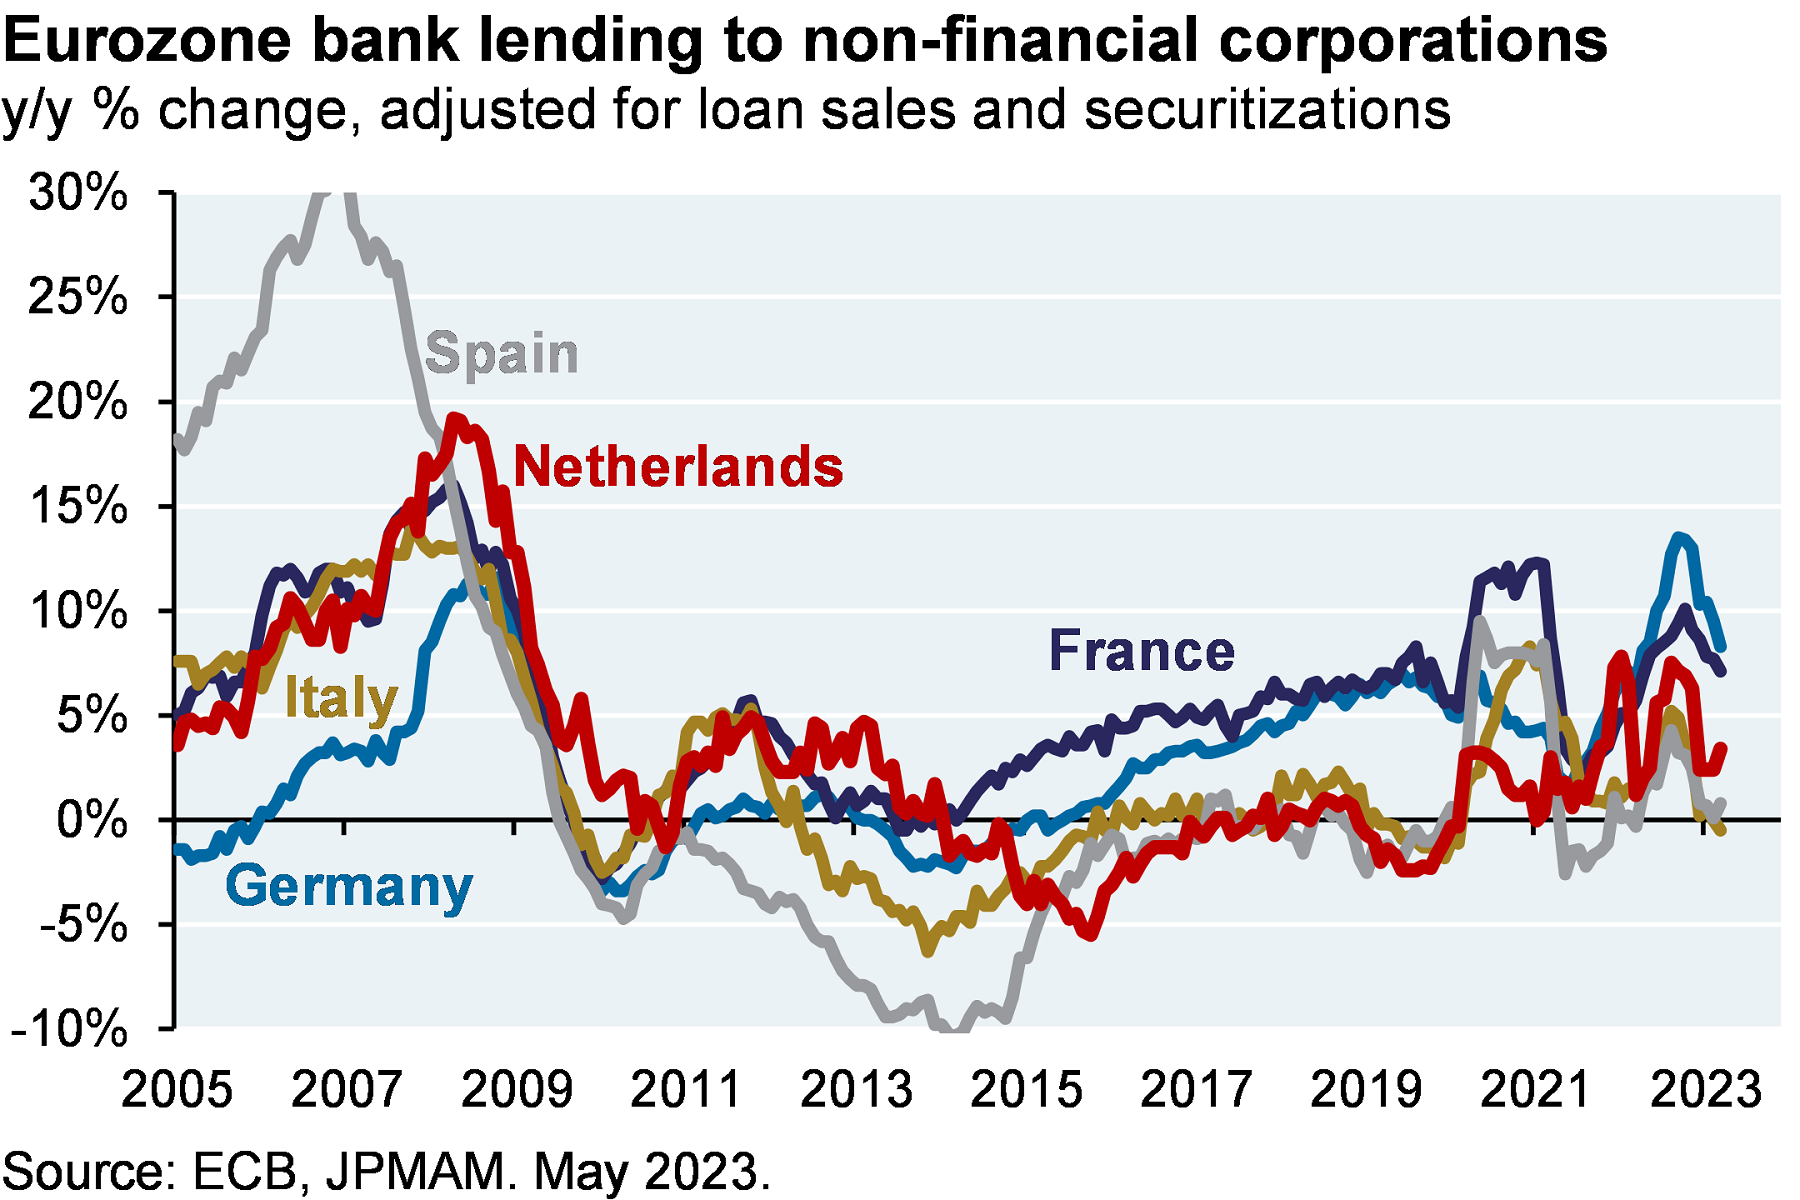 Eurozone bank leading to non-financial corporations